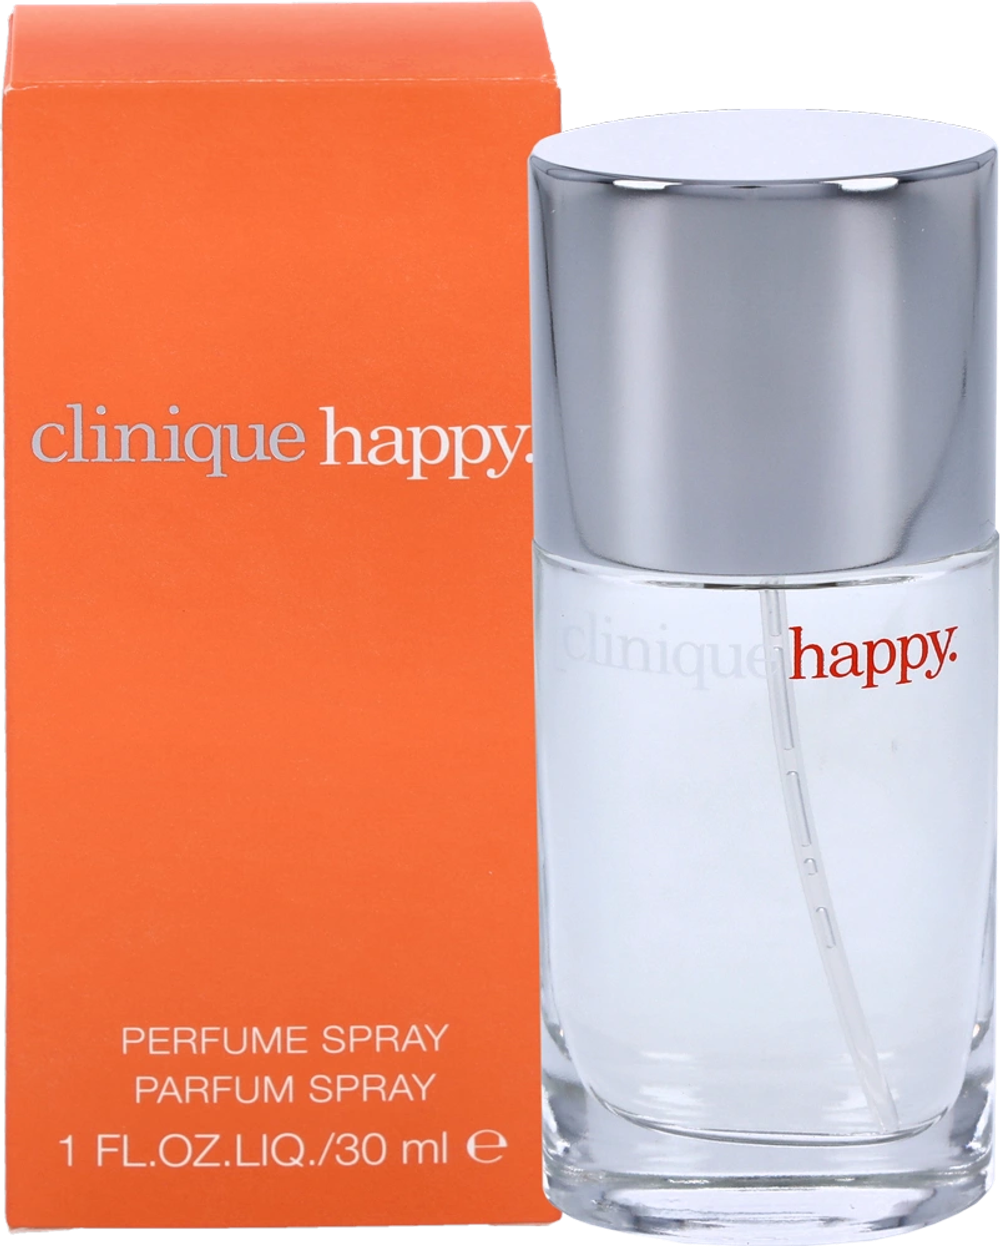 Deals on Clinique Happy For Women from Fleggaard at 169 kr.